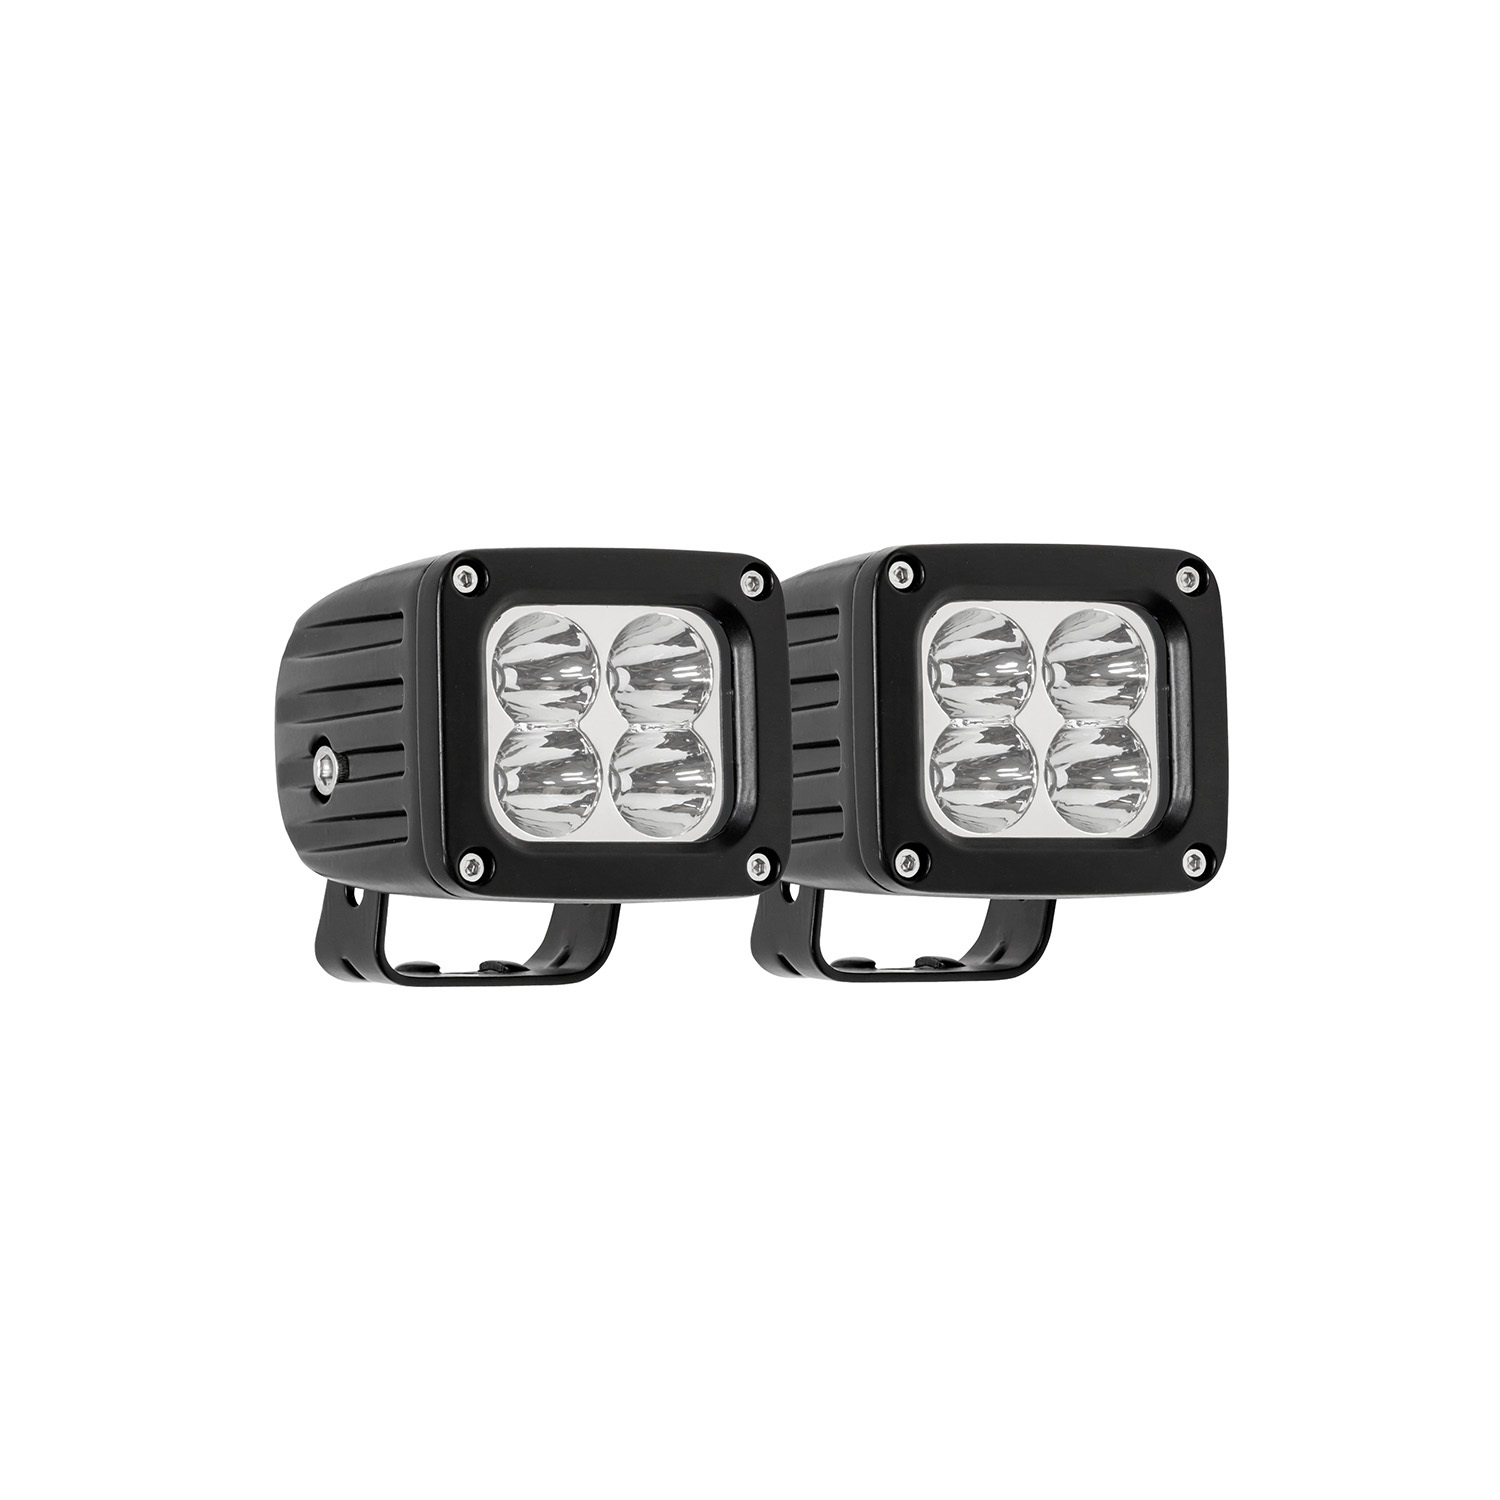 Picture of Westin 09-12252A-PR Quadrant Led Auxiliary Light